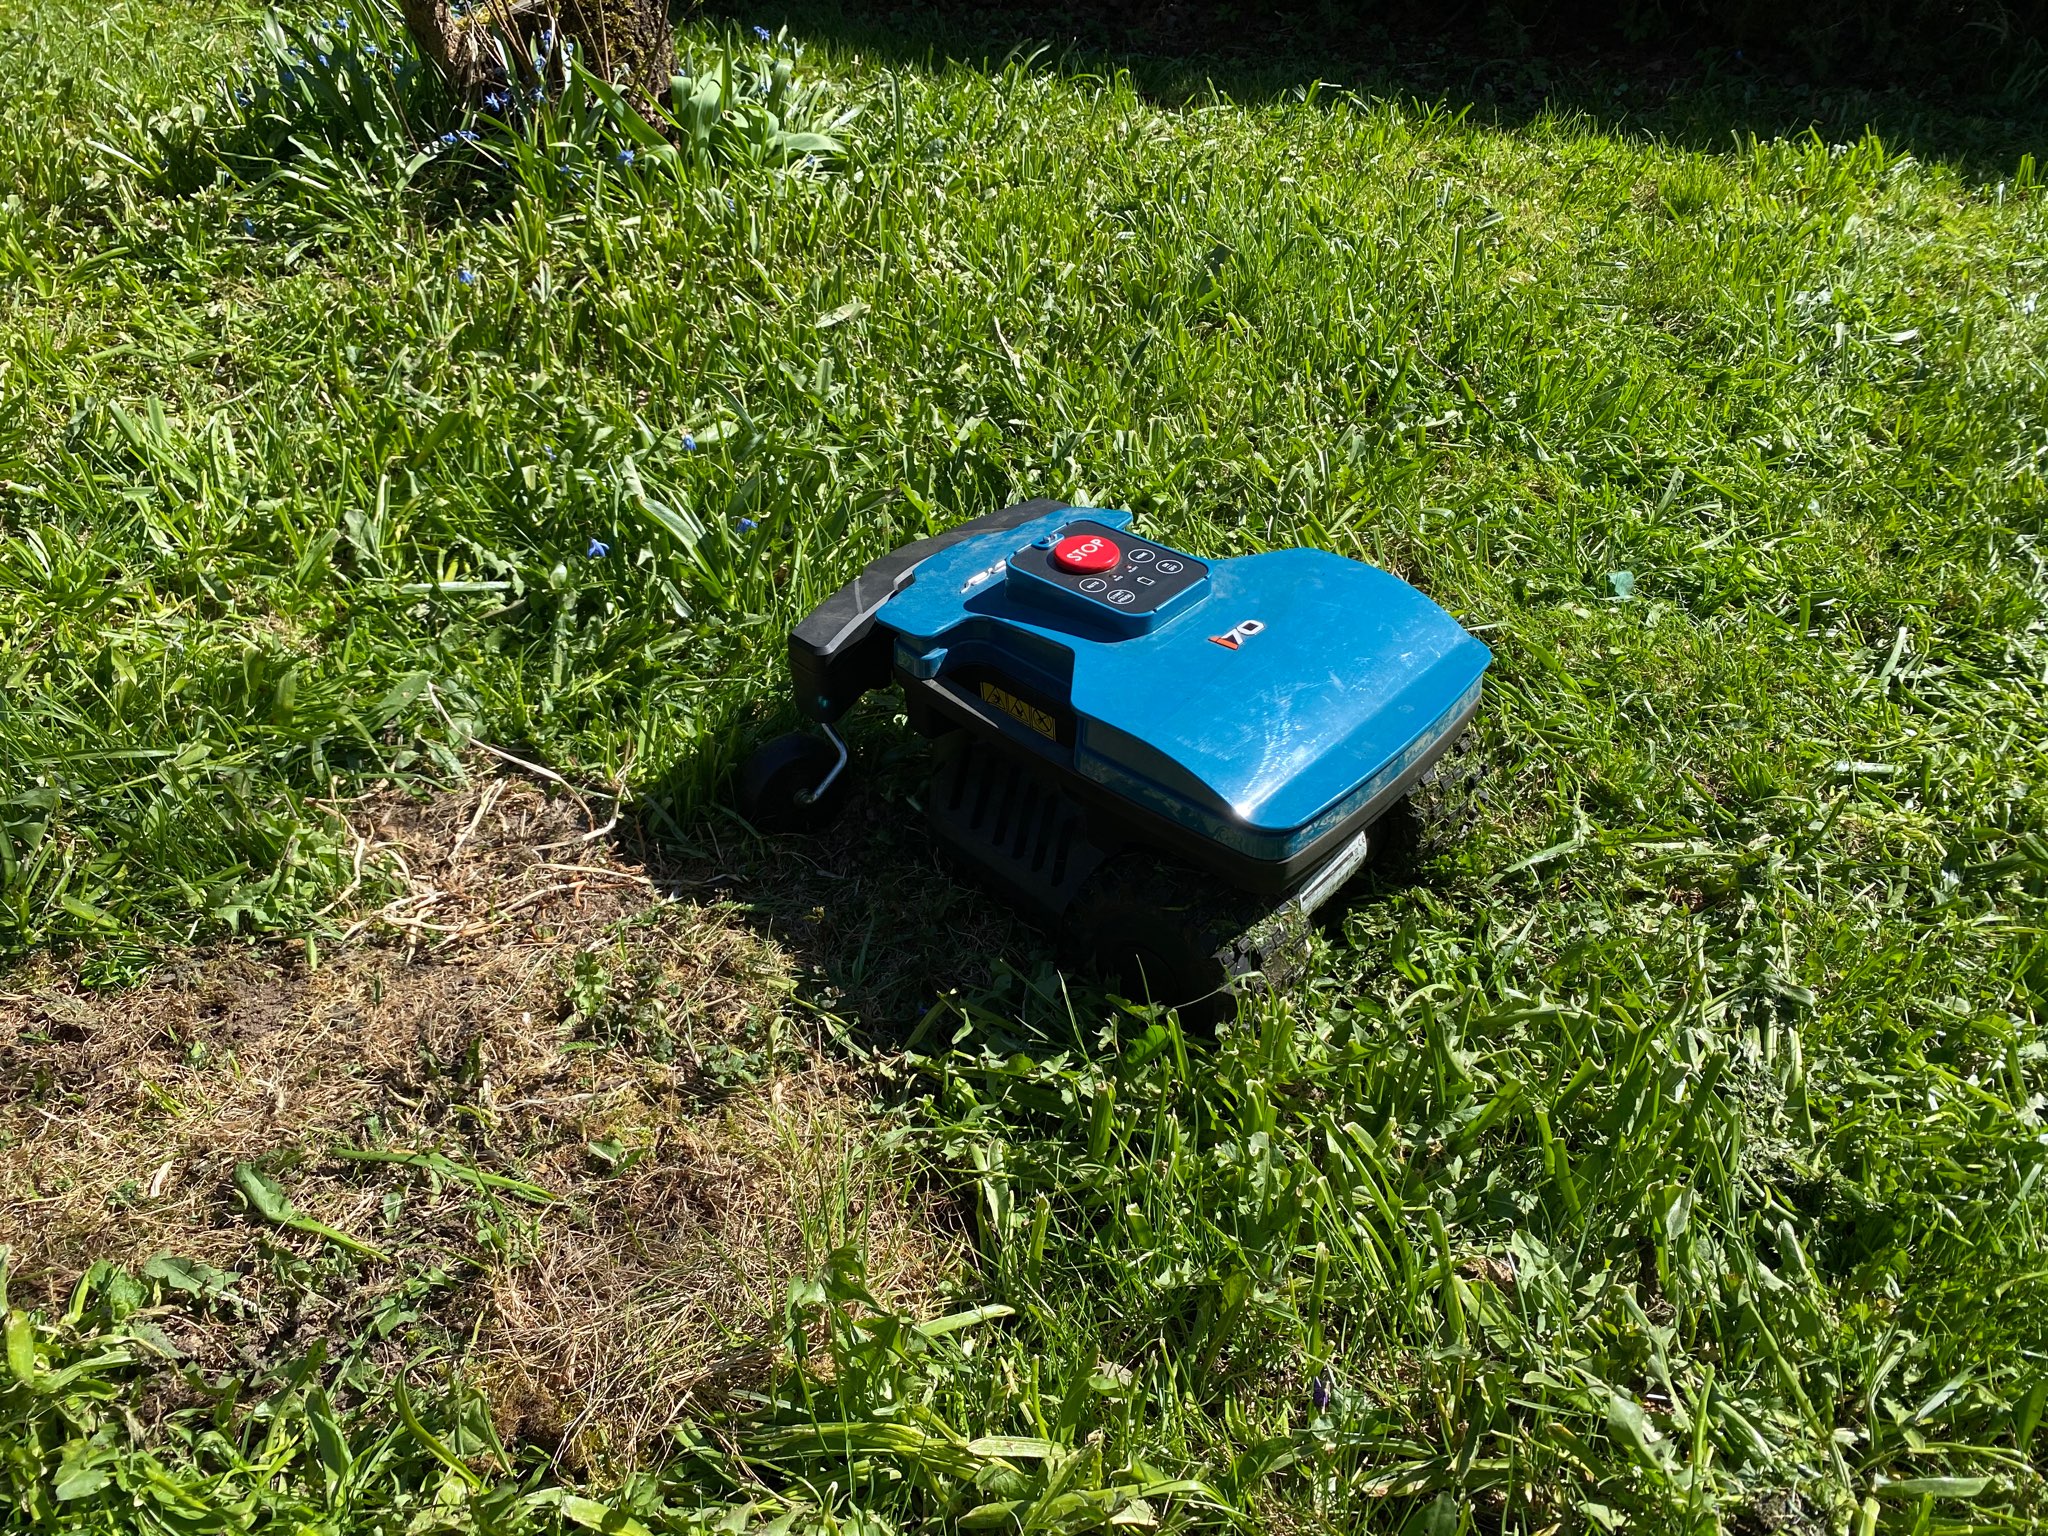 Lawn preparations before a robotic mower installation